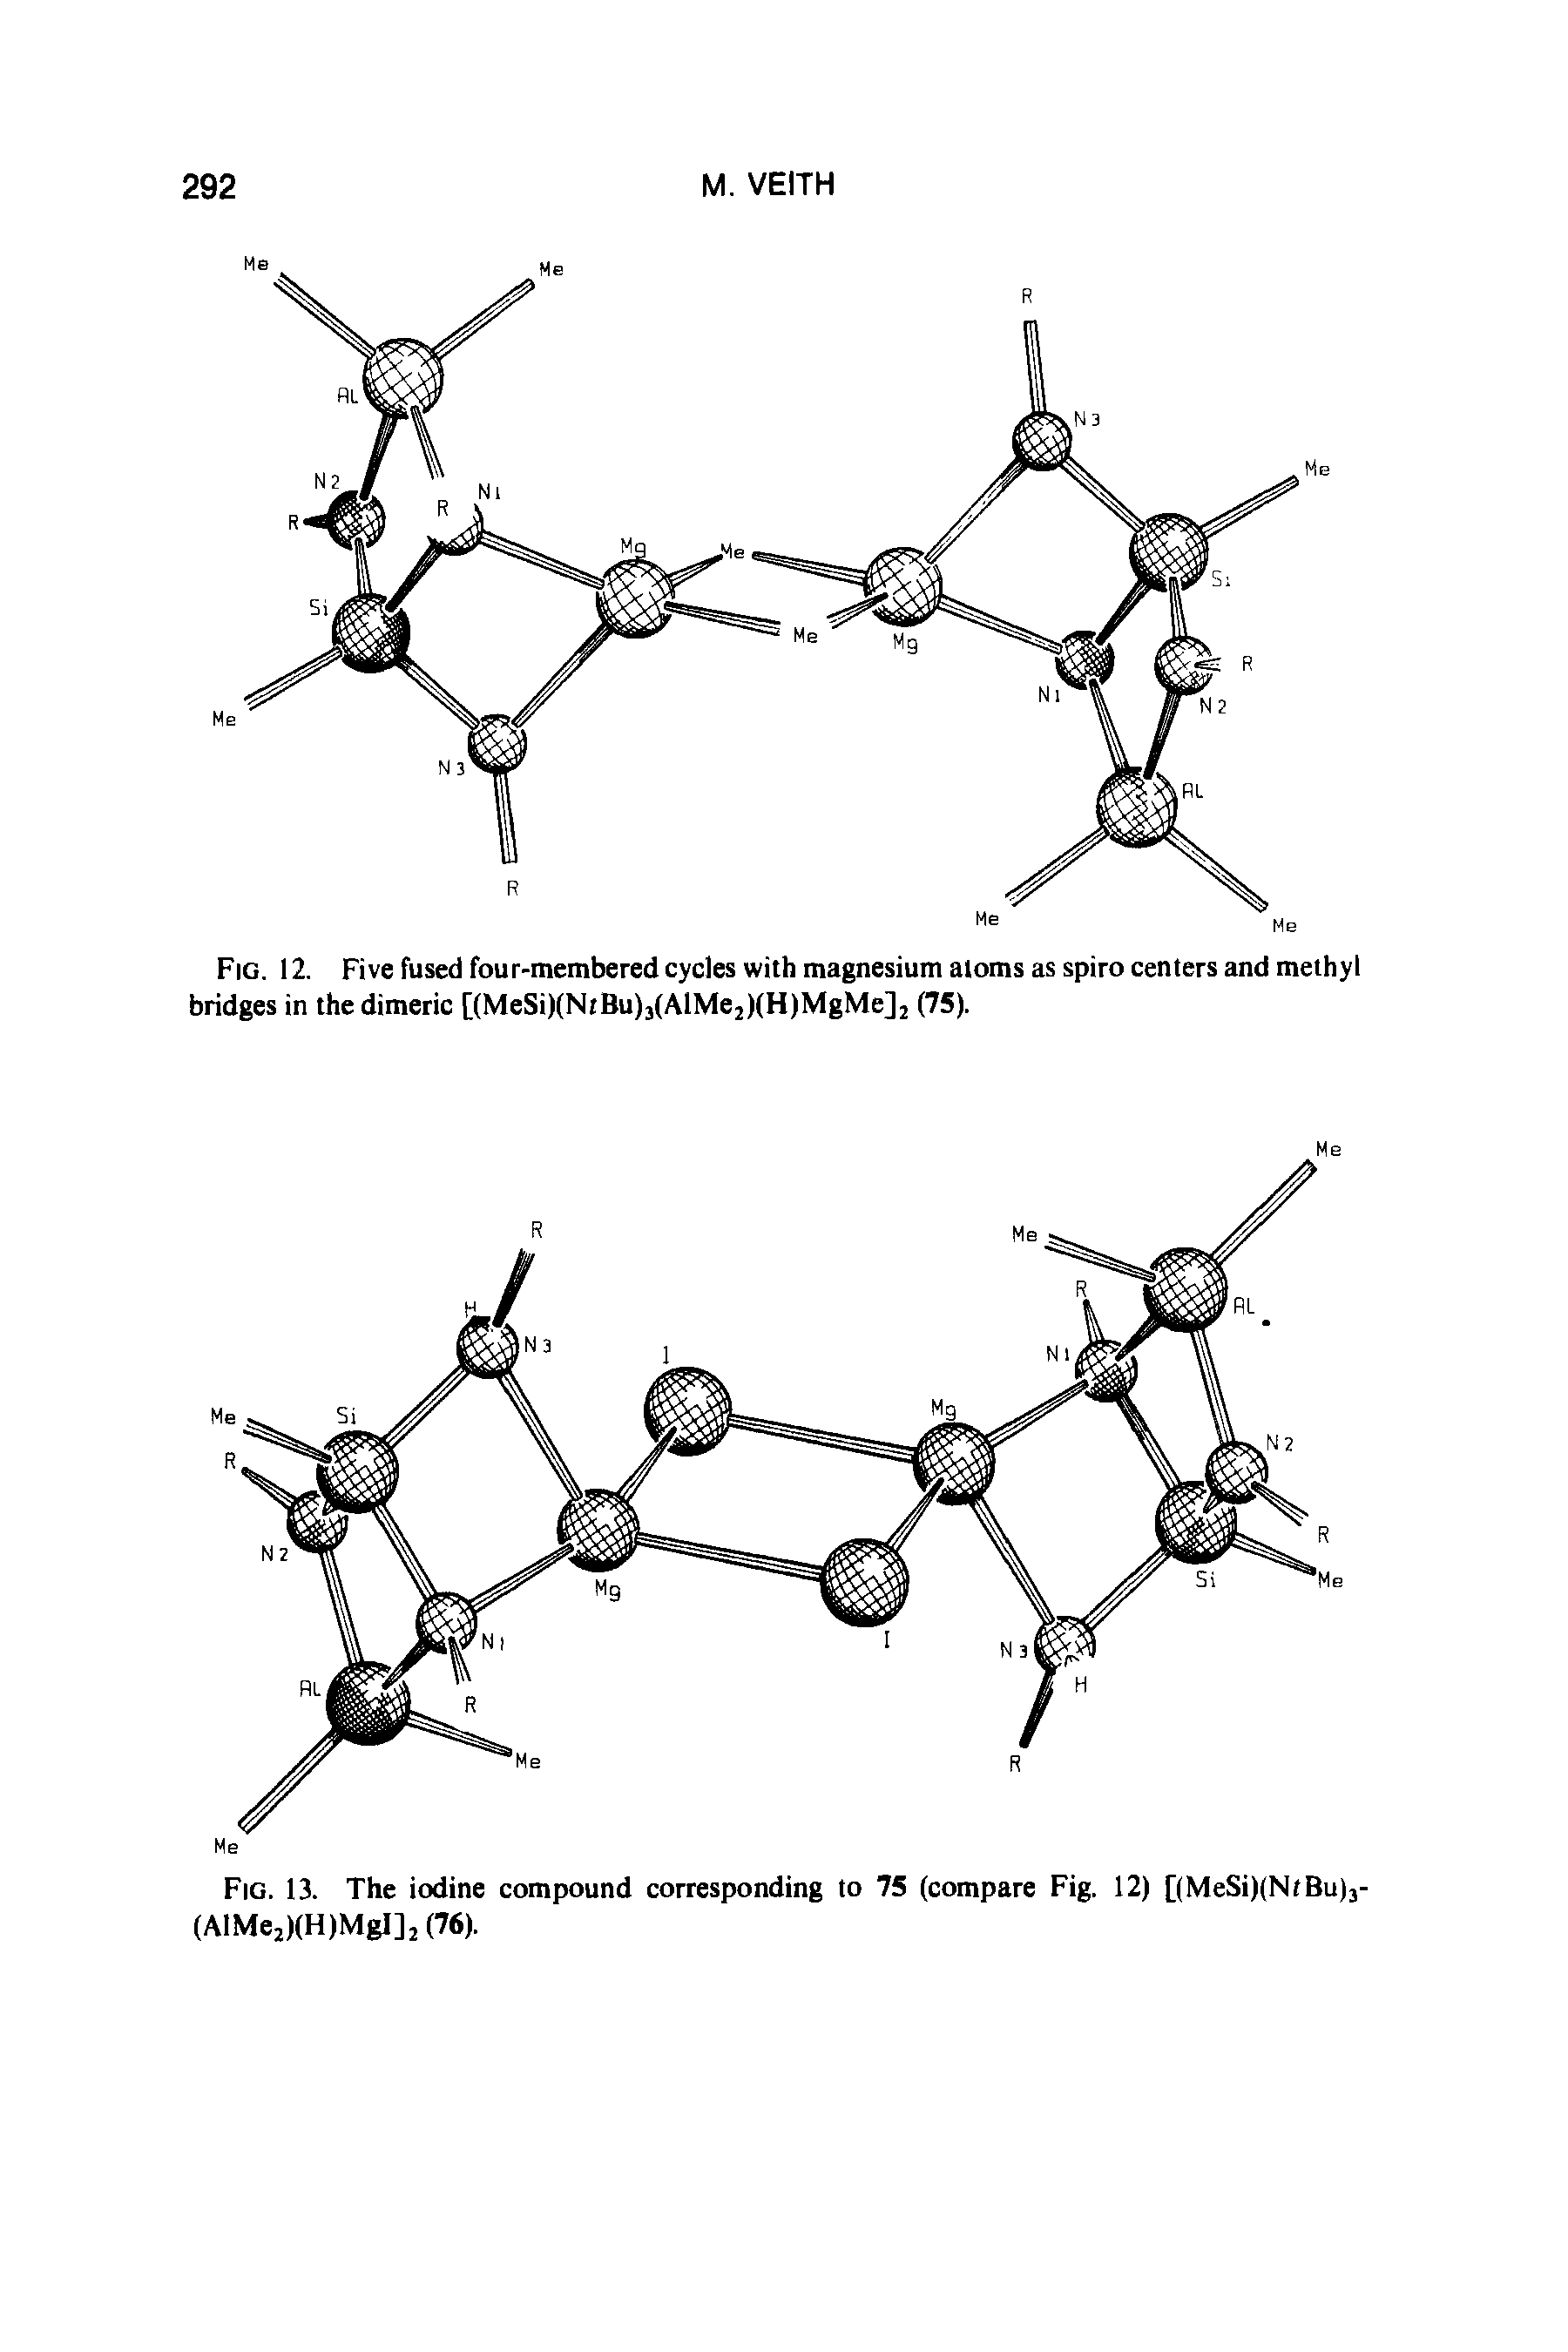 Fig. 12. Five fused four-membered cycles with magnesium atoms as spiro centers and methyl bridges in the dimeric [(MeSi)(NrBu)3(AlMe2)(H)MgMe]2 (75).